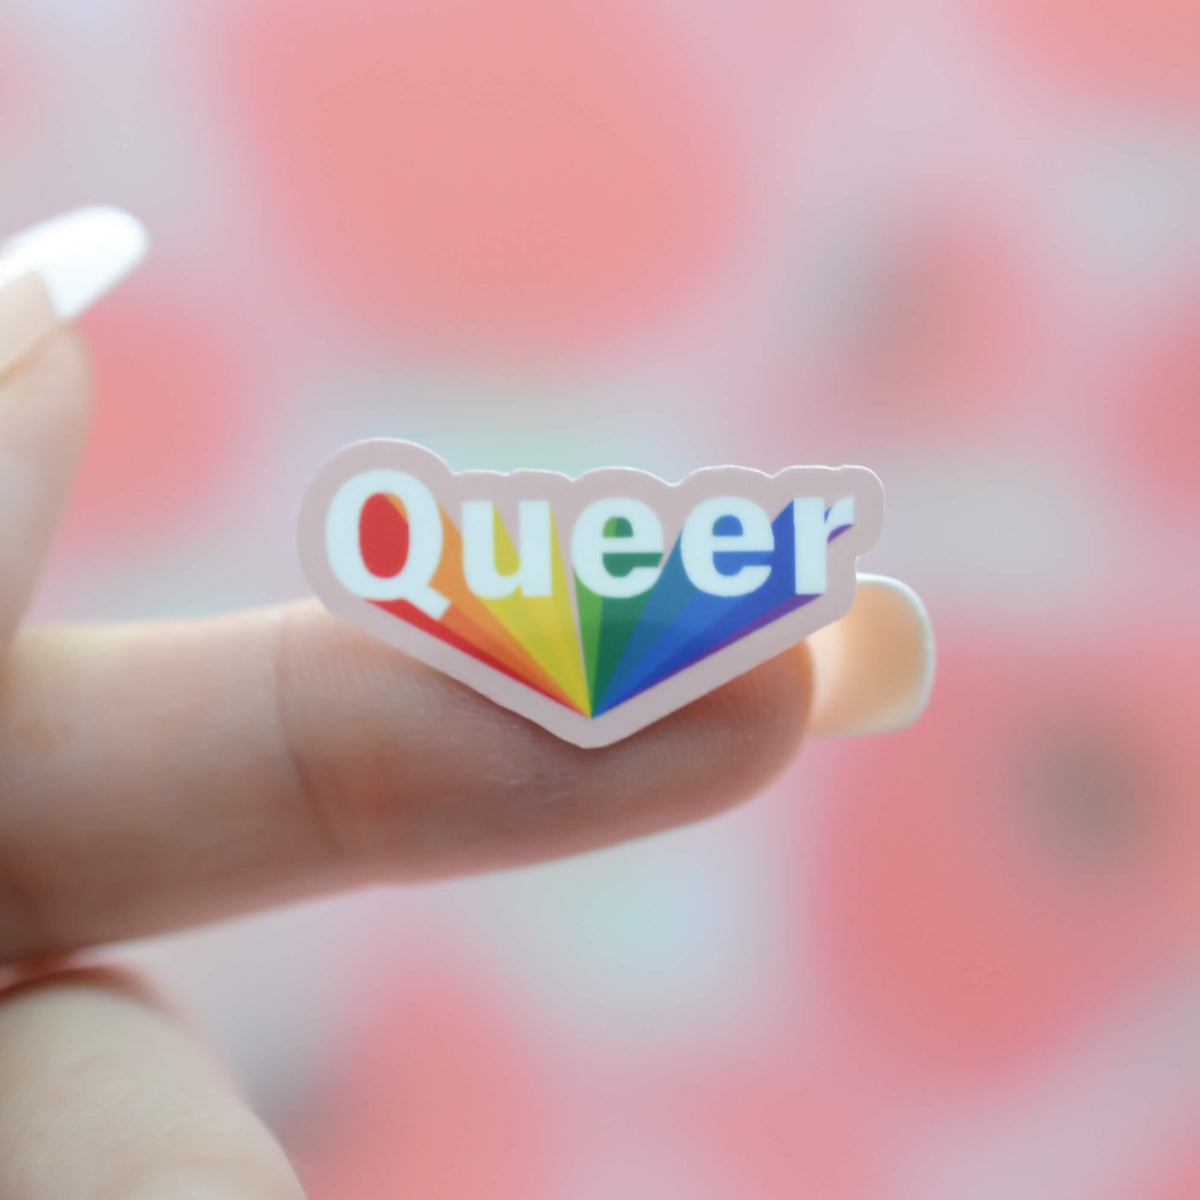 Small Queer Sticker That is stuck to a finger